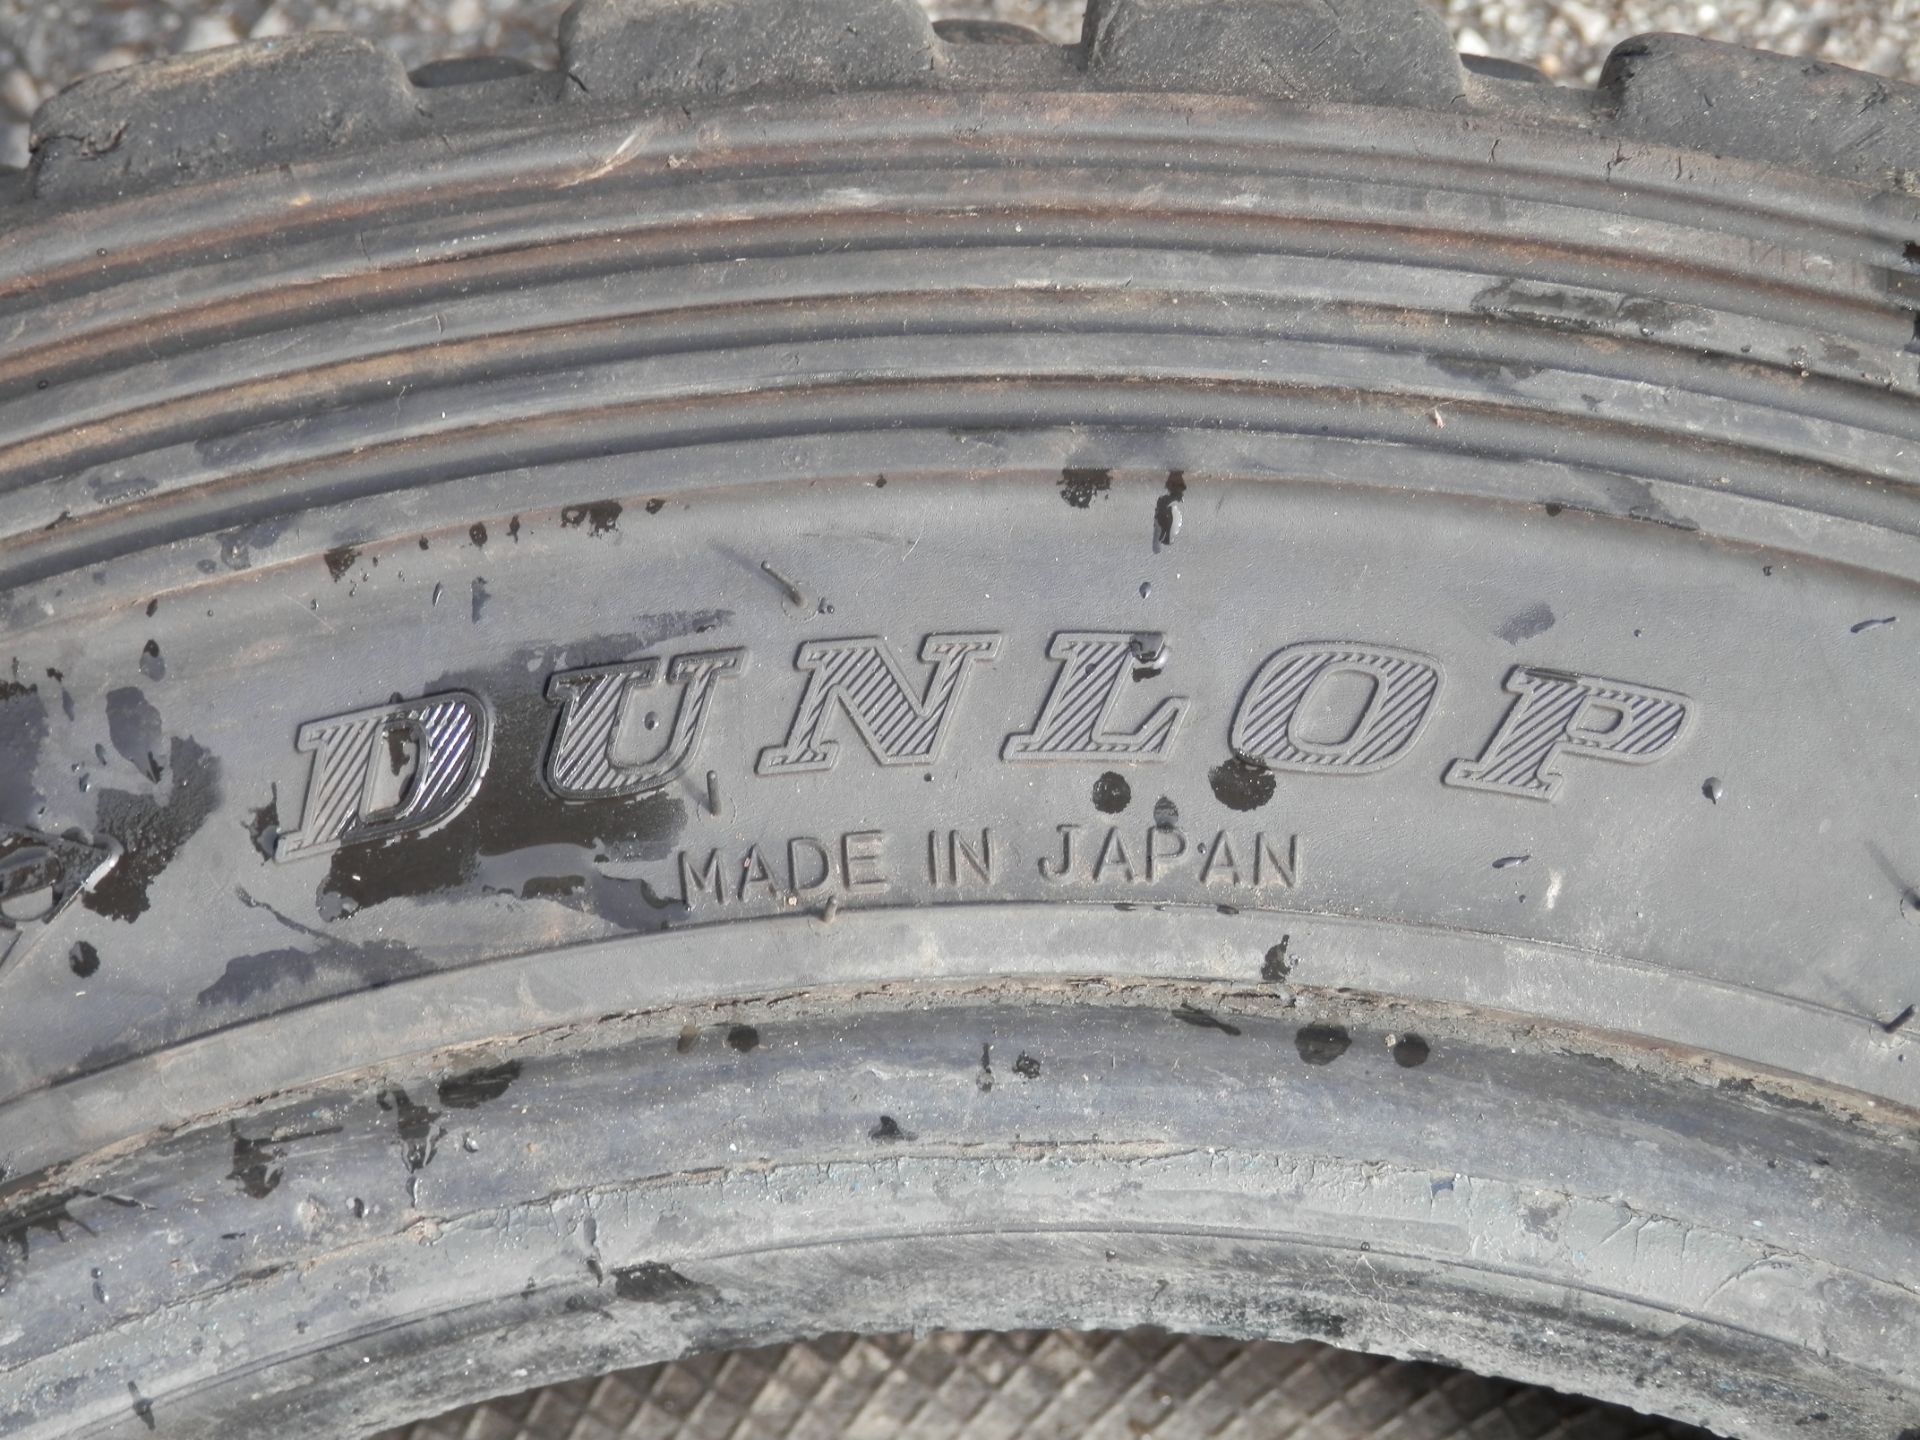 4 X DUNLOP DIREZZA RALLYE/OFF ROAD TYRES, 185/65/15 FROM A 2000 MITSUBISHI EVOLUTION. - Image 2 of 8